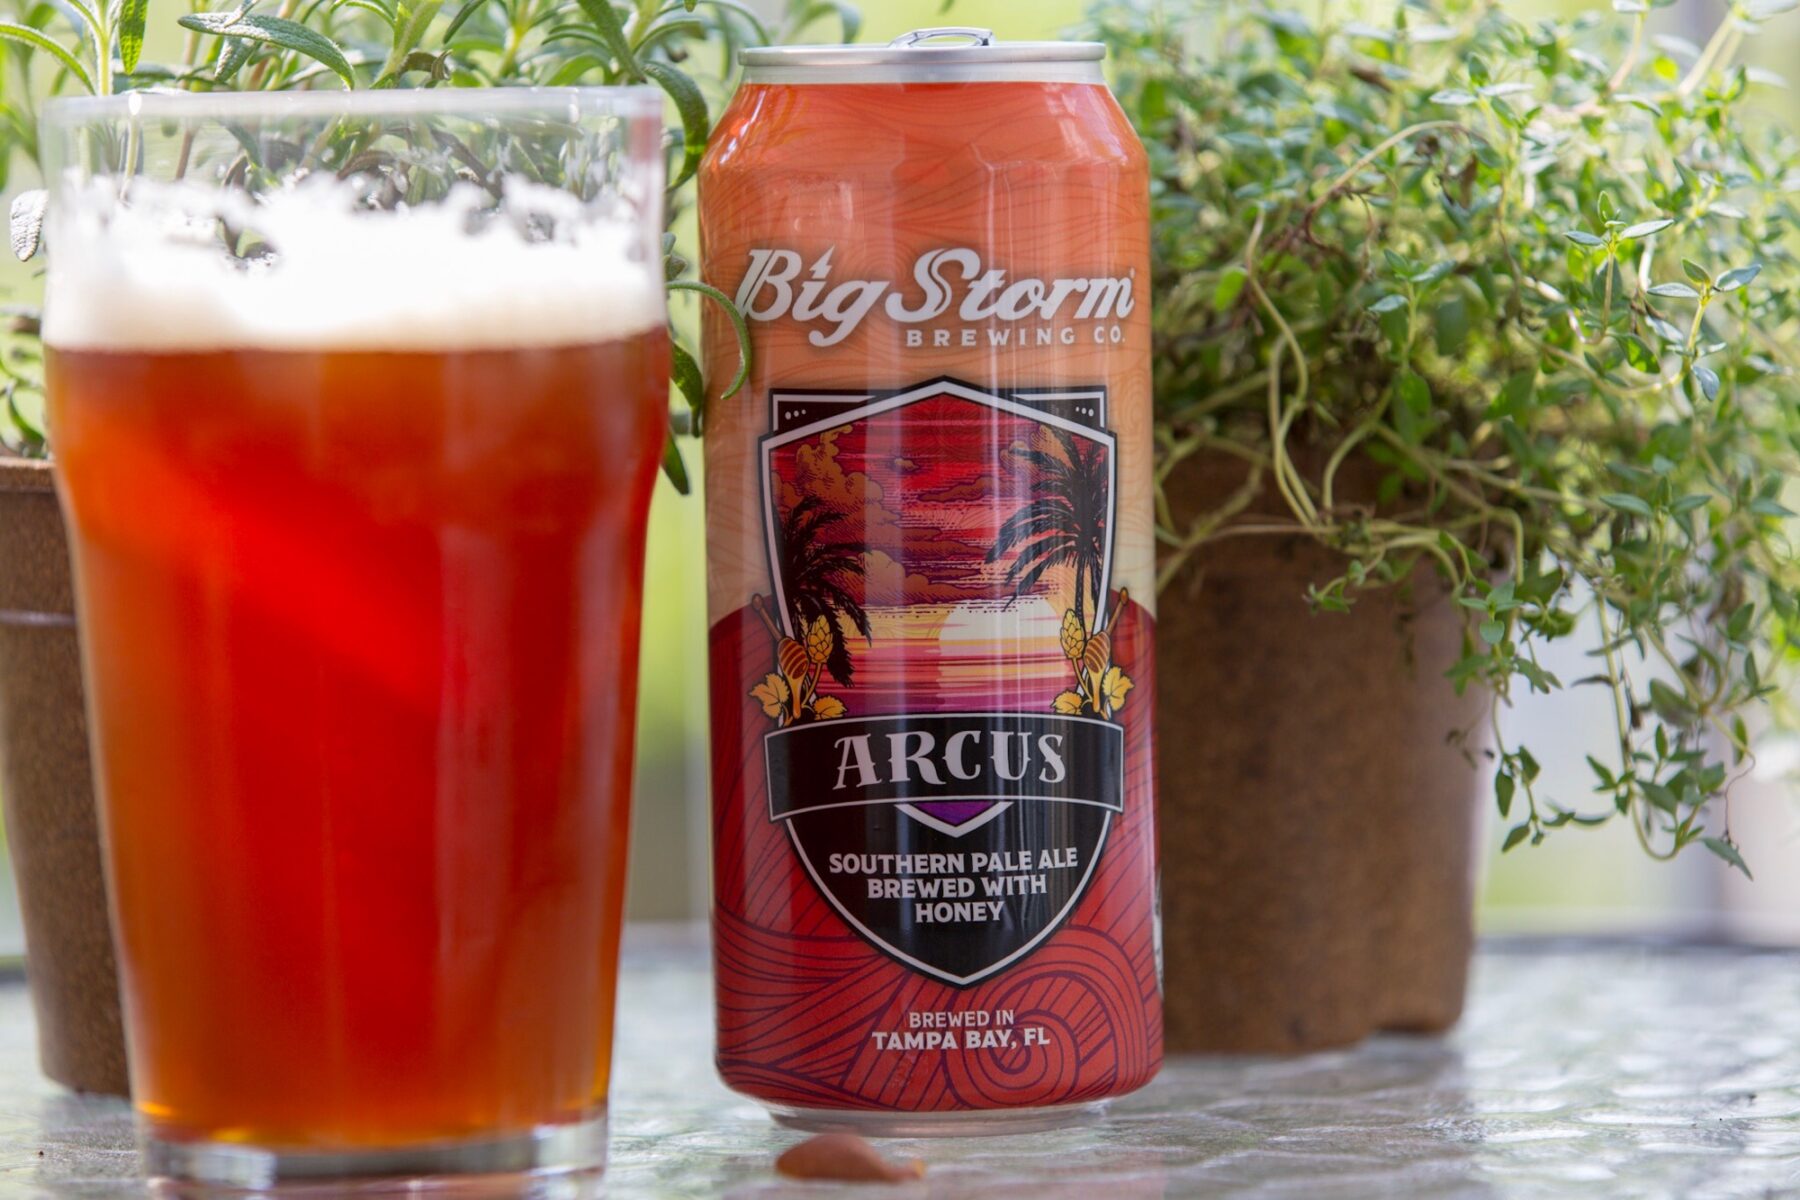 Big Storm Brewing Co.'s Arcus Southern Pale Ale